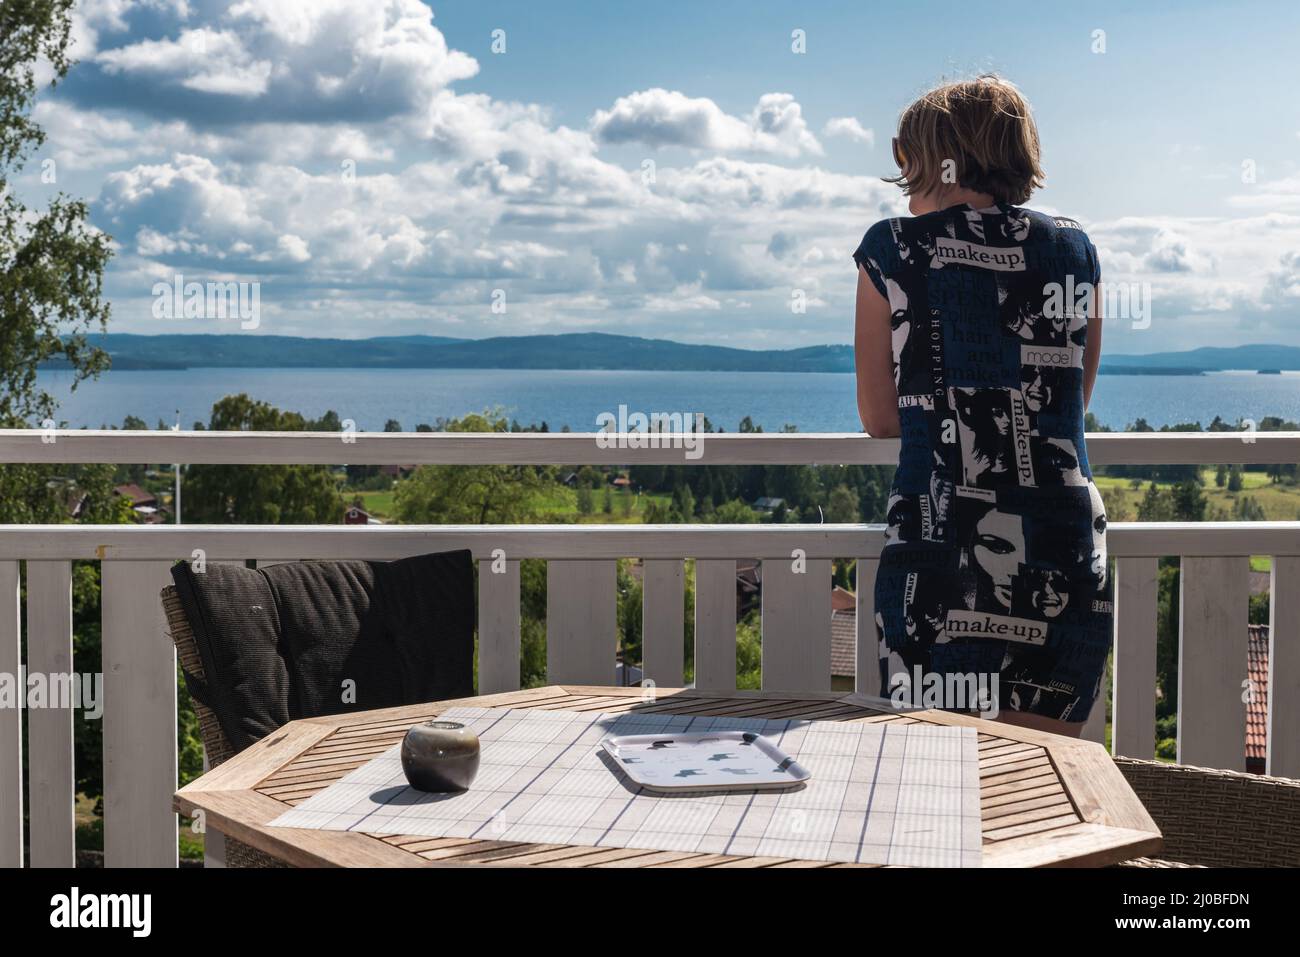 Segersta, Halsingland - Sweden - 08 04 2019   Attractive woman in summer dress posing at a terrace of a Swedish Bed and Breakfast with a view over the Stock Photo